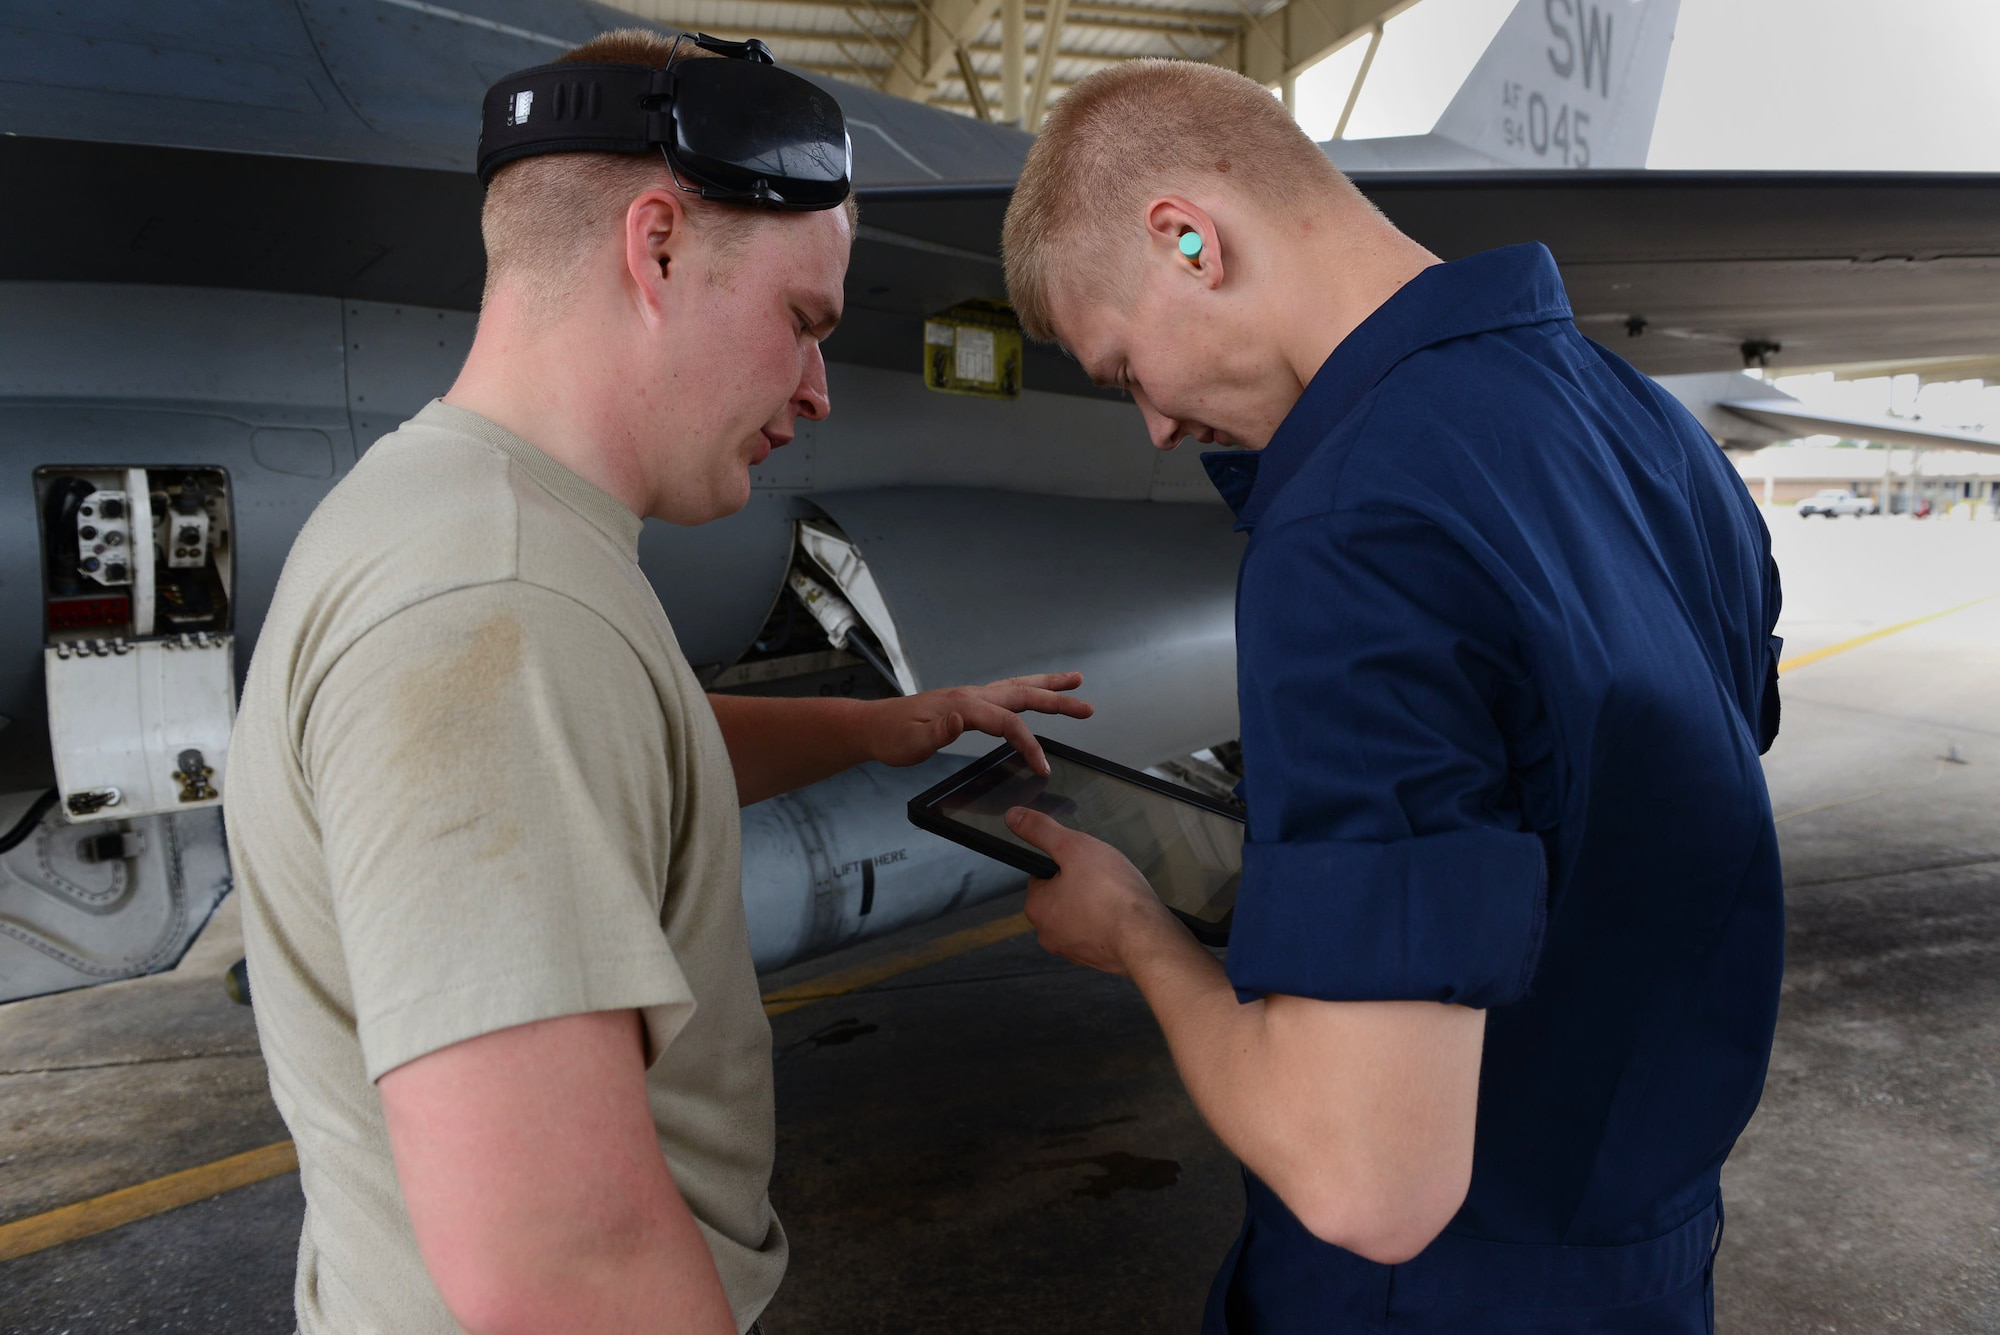 U.S. Air Force Airman 1st Class Dominic Vaughn explains to Airman Eric Bain how to navigate an iPad version of a technical order manual at Shaw Air Force Base, S.C.,  April 29, 2014. Both are 20th Aircraft Maintenance Squadron tactical aircraft maintainers (U.S. Air Force photo by Airman 1st Class Jensen Stidham)
